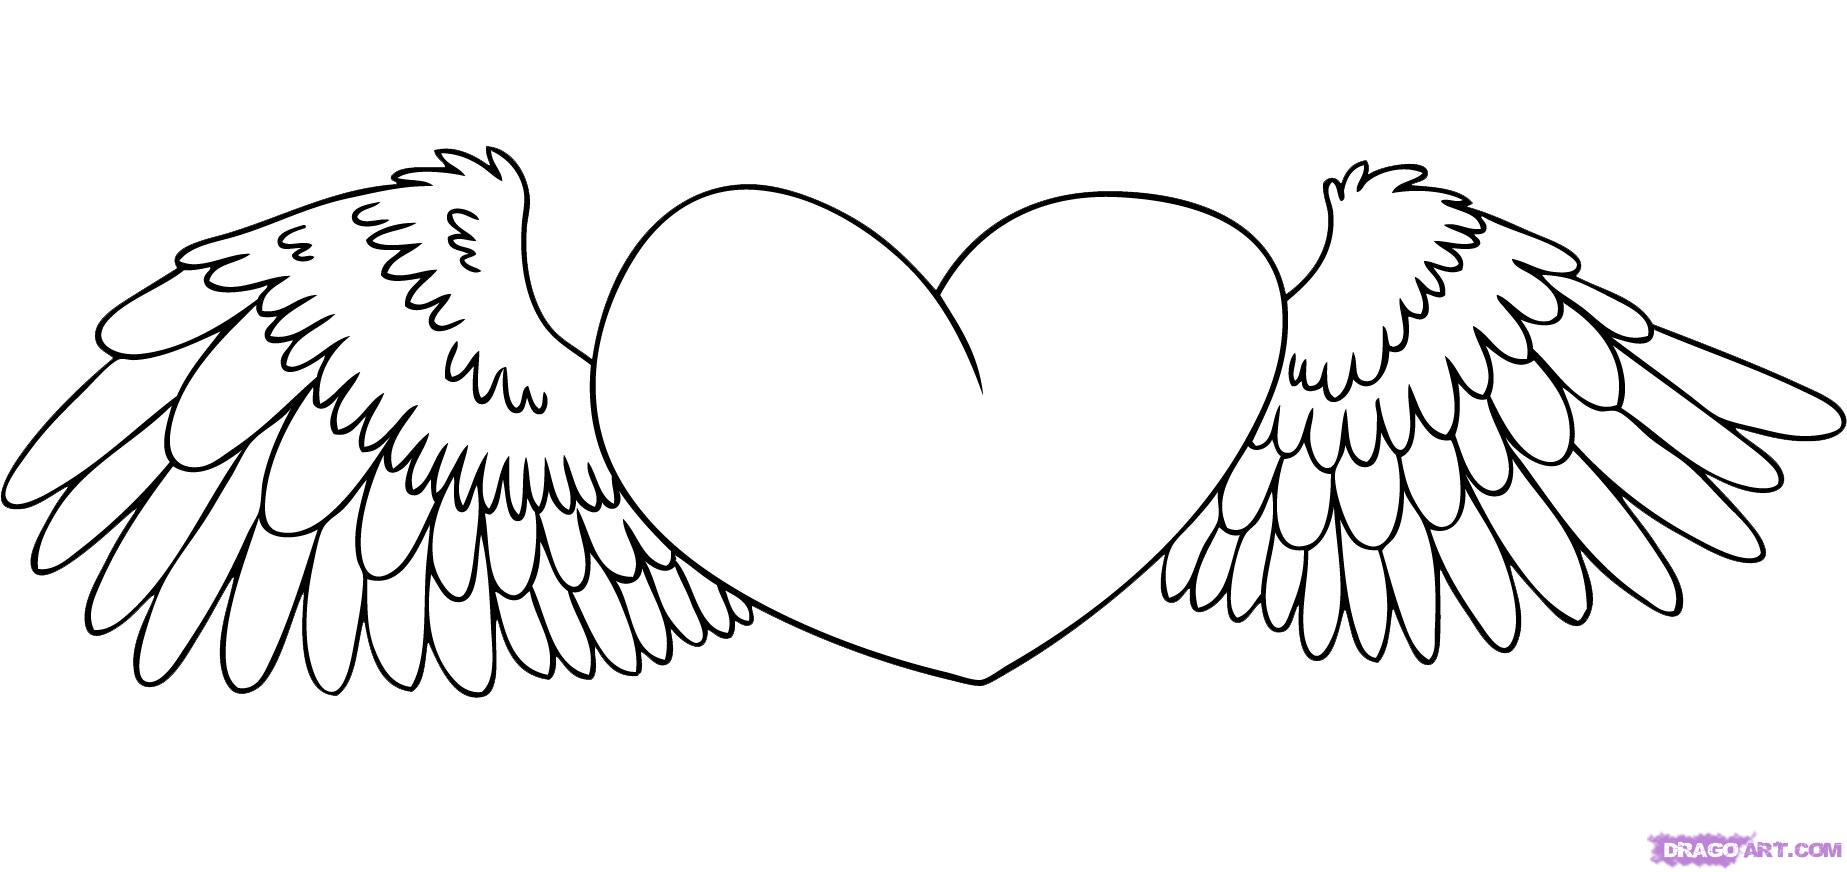 How to Draw a Heart with Wings, Step by Step, Tattoos, Pop Culture 